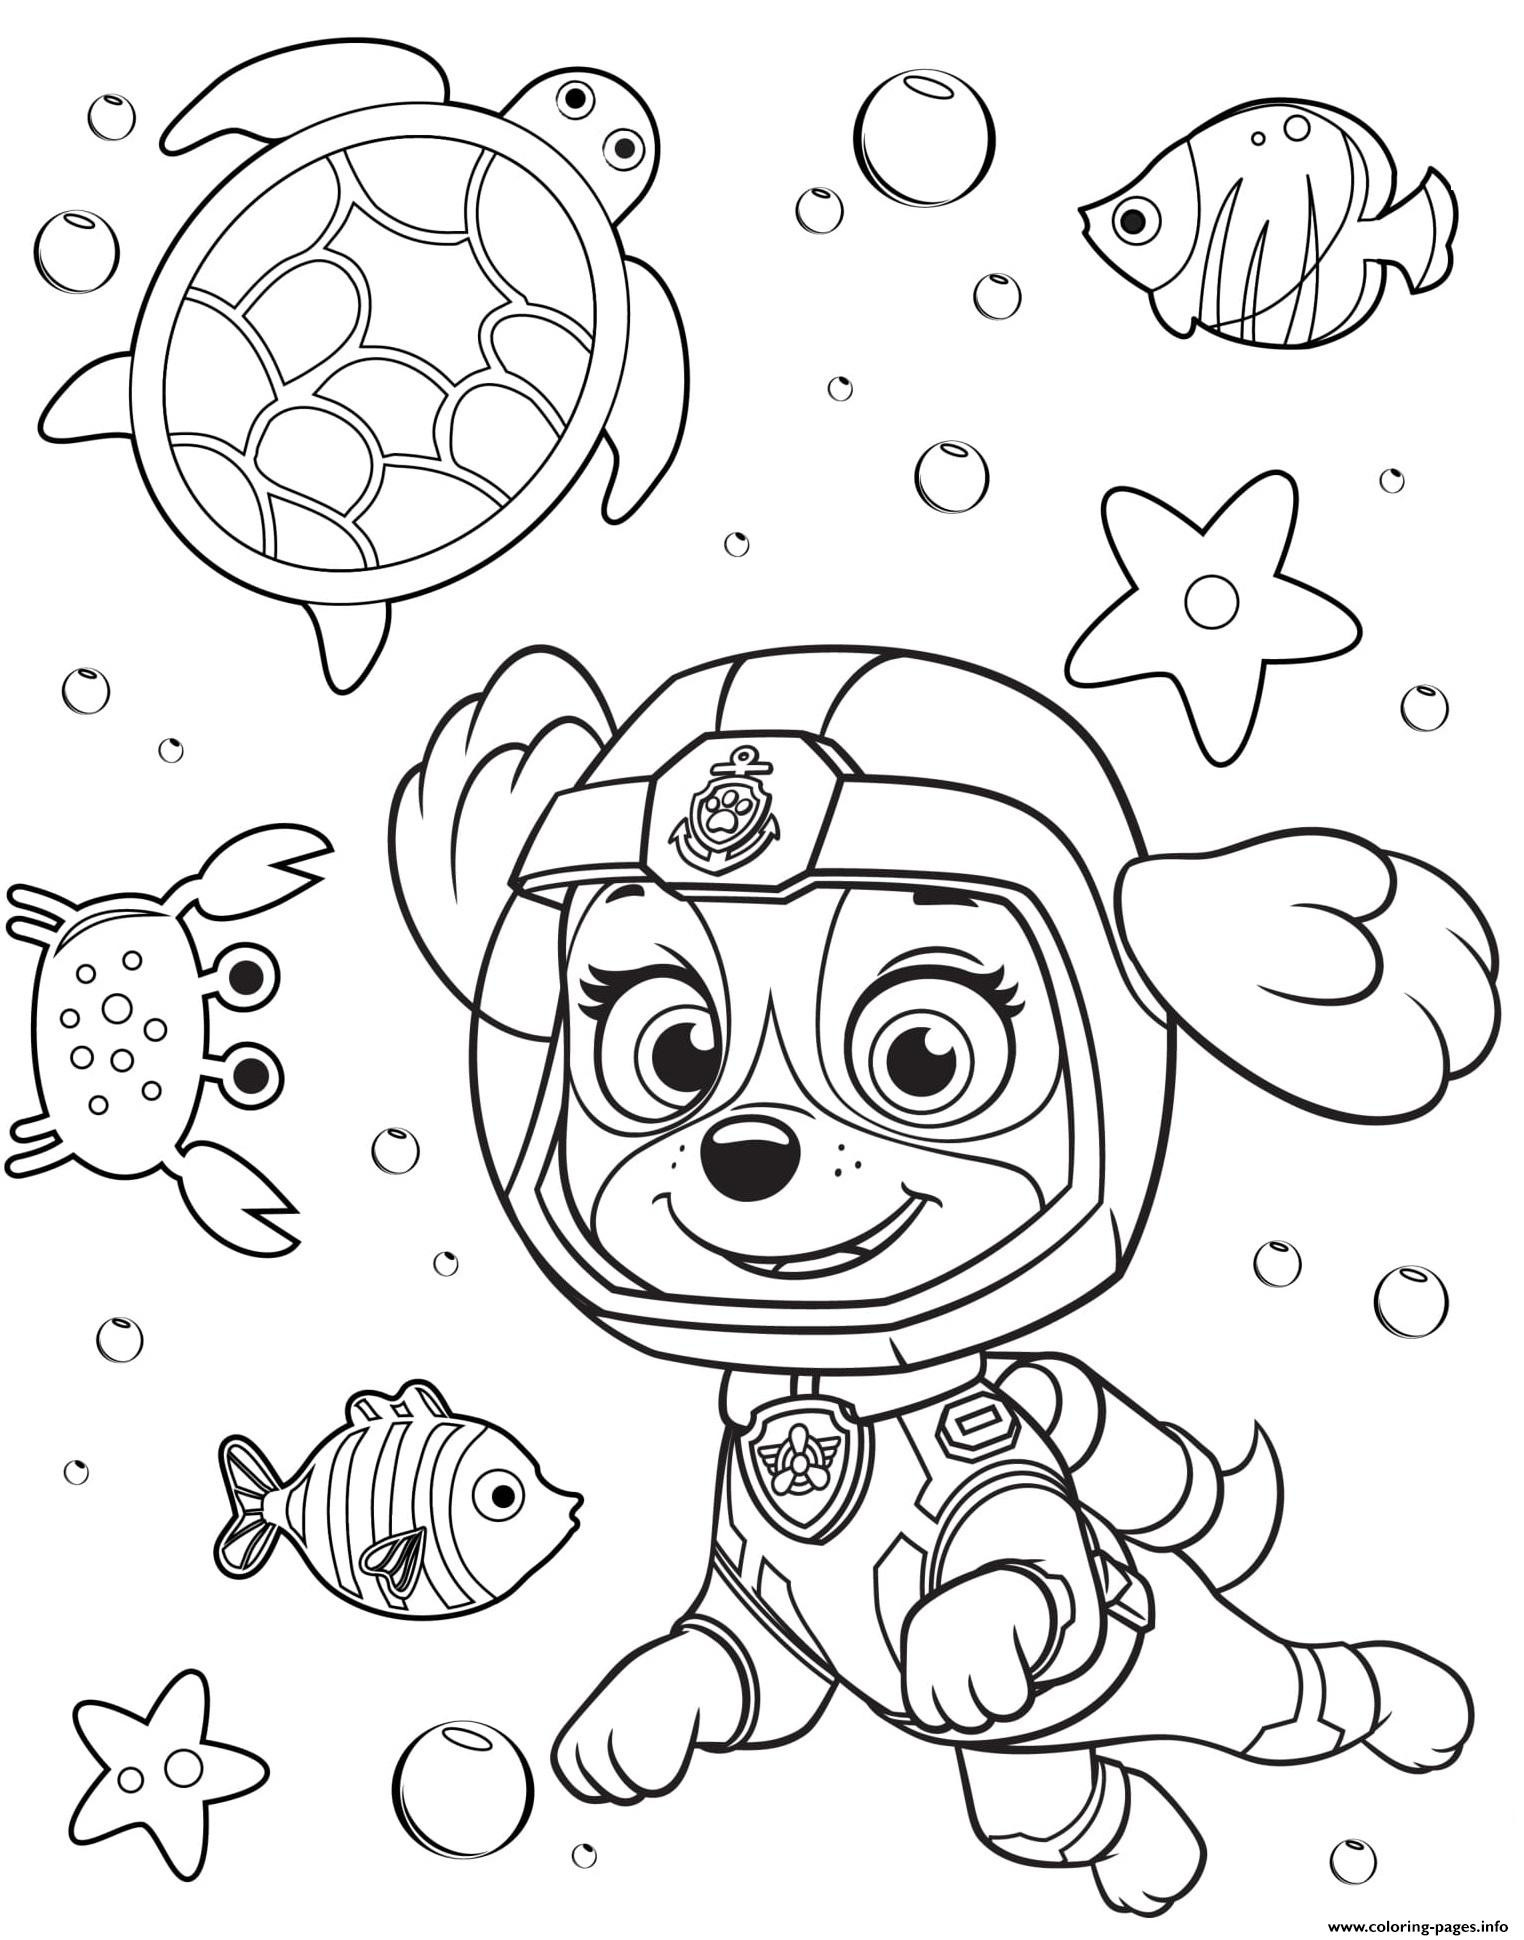 Coloring Pages For Kids Paw Patrol
 Sea Patrol Skye Paw Coloring Pages Printable